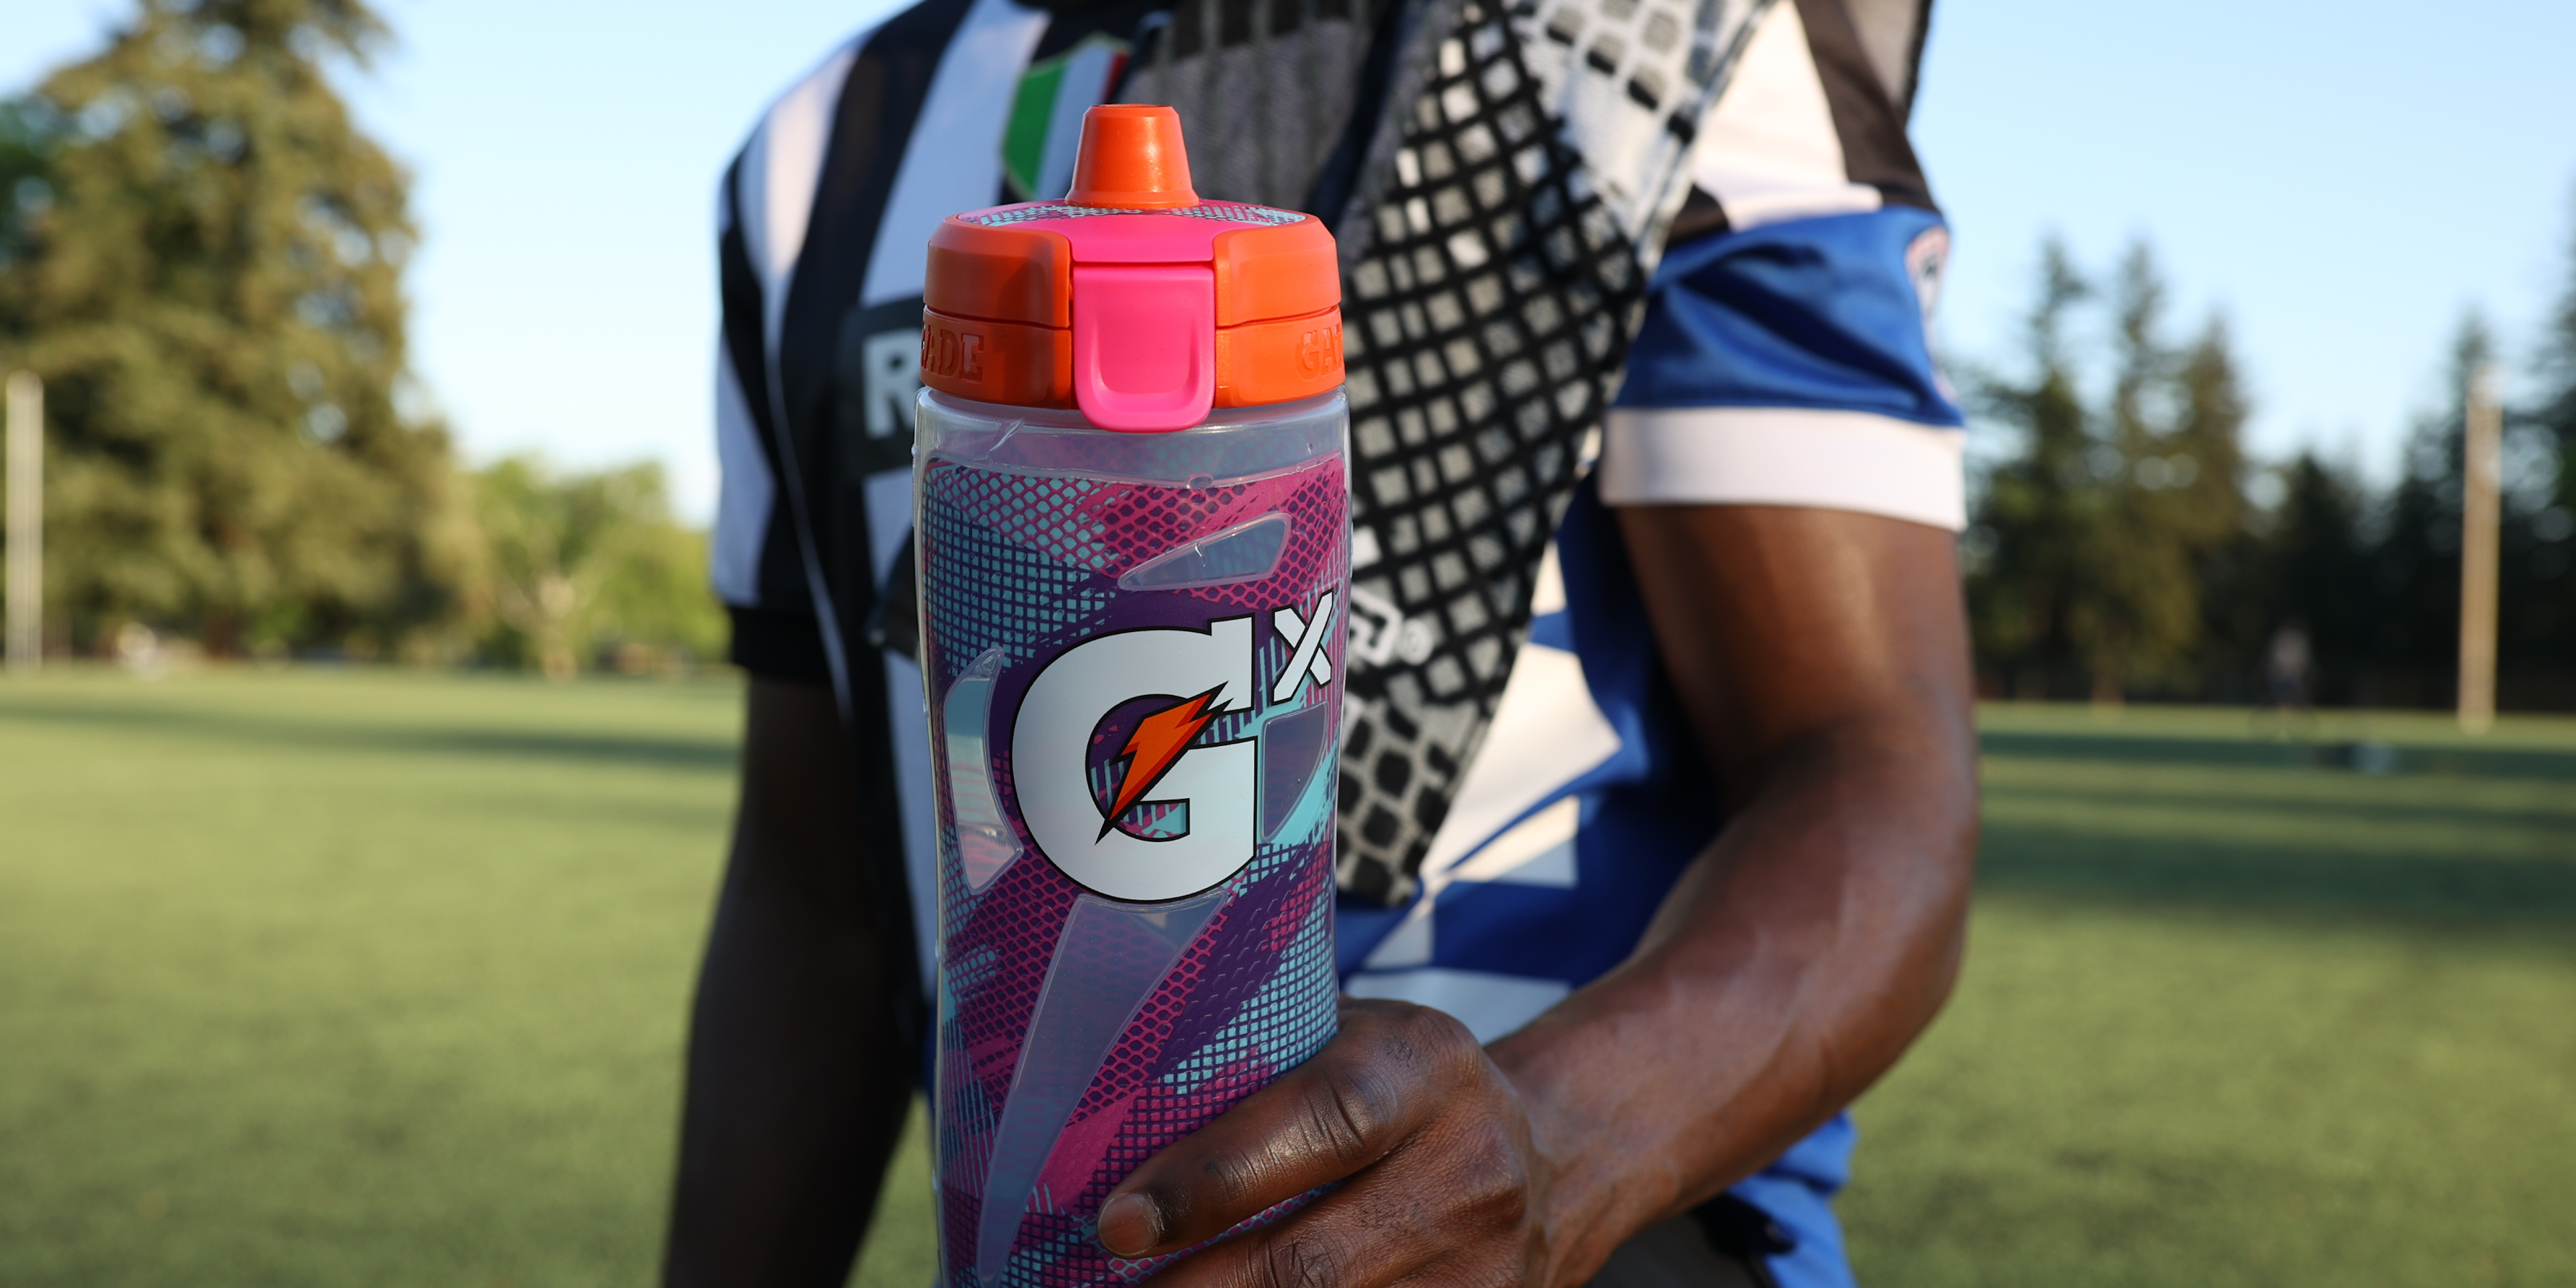 Athlete with limited edition Gx bottle